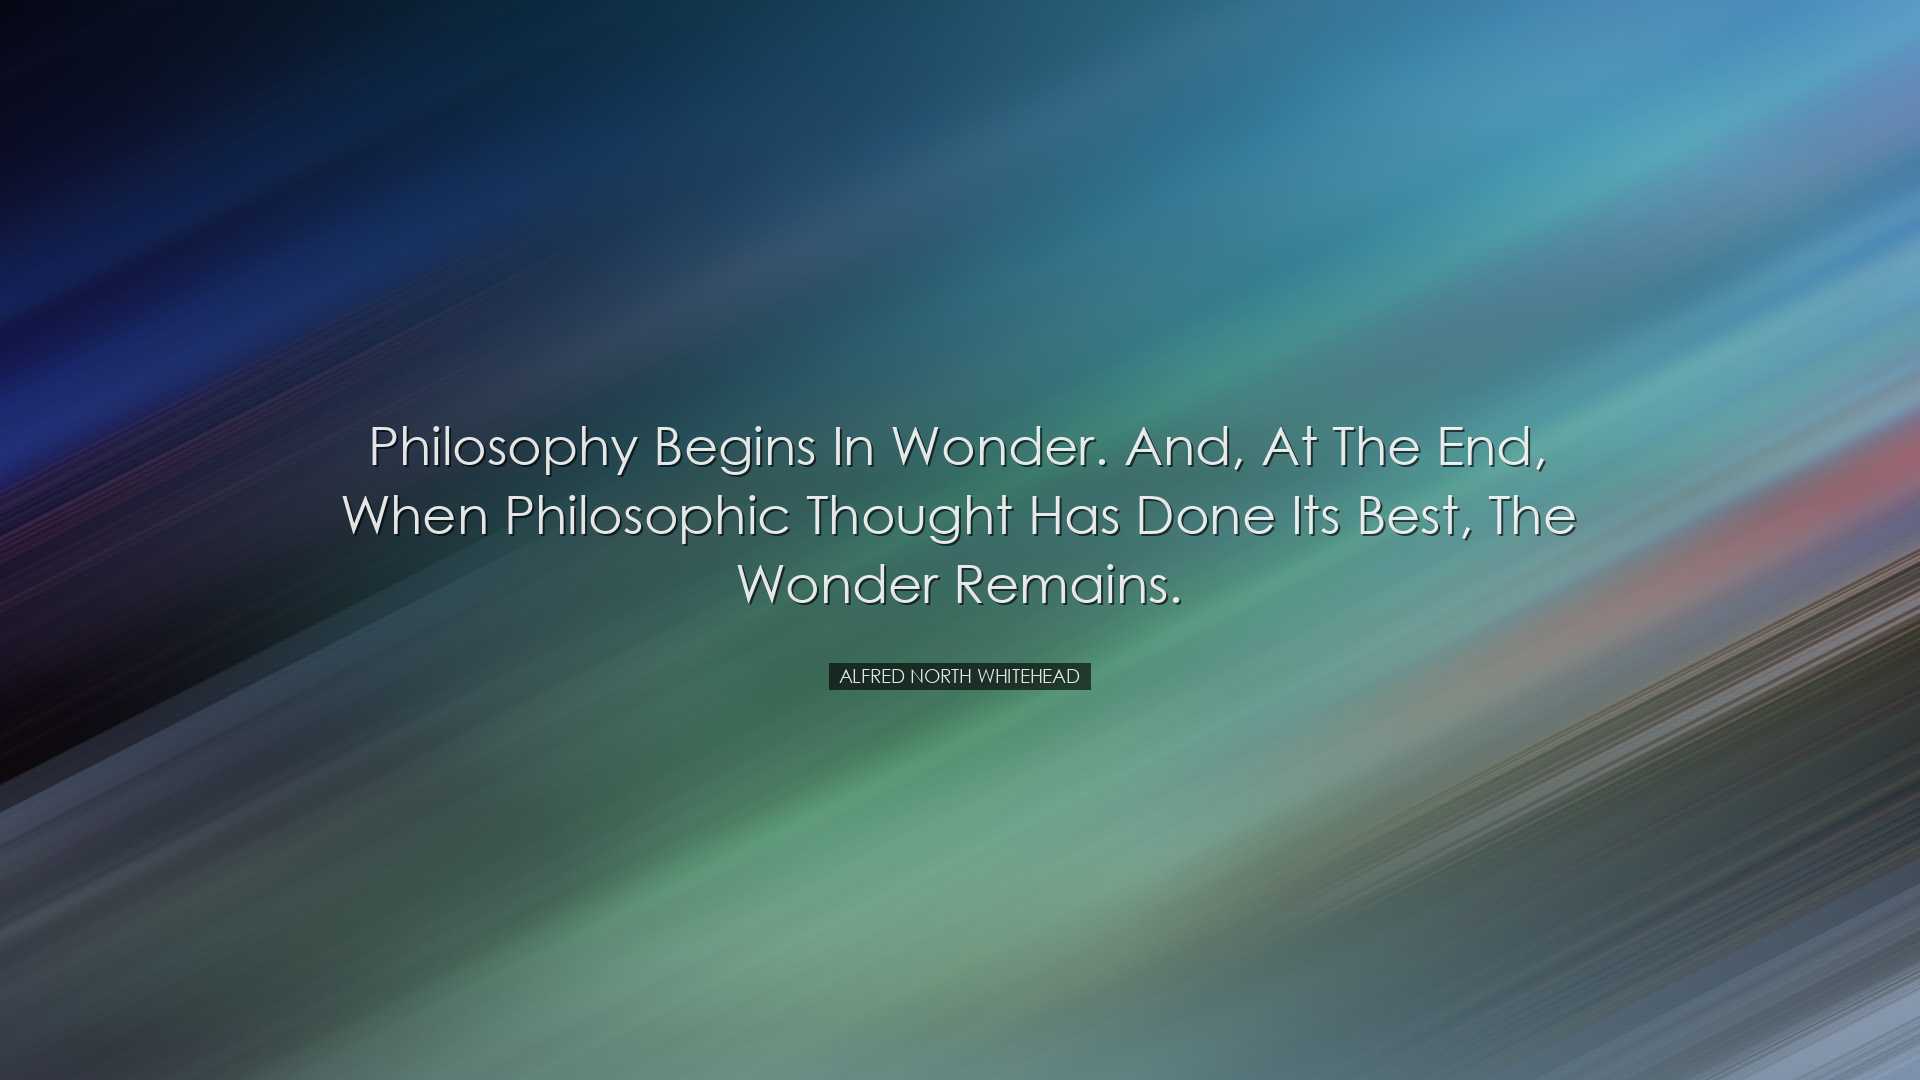 Philosophy begins in wonder. And, at the end, when philosophic tho